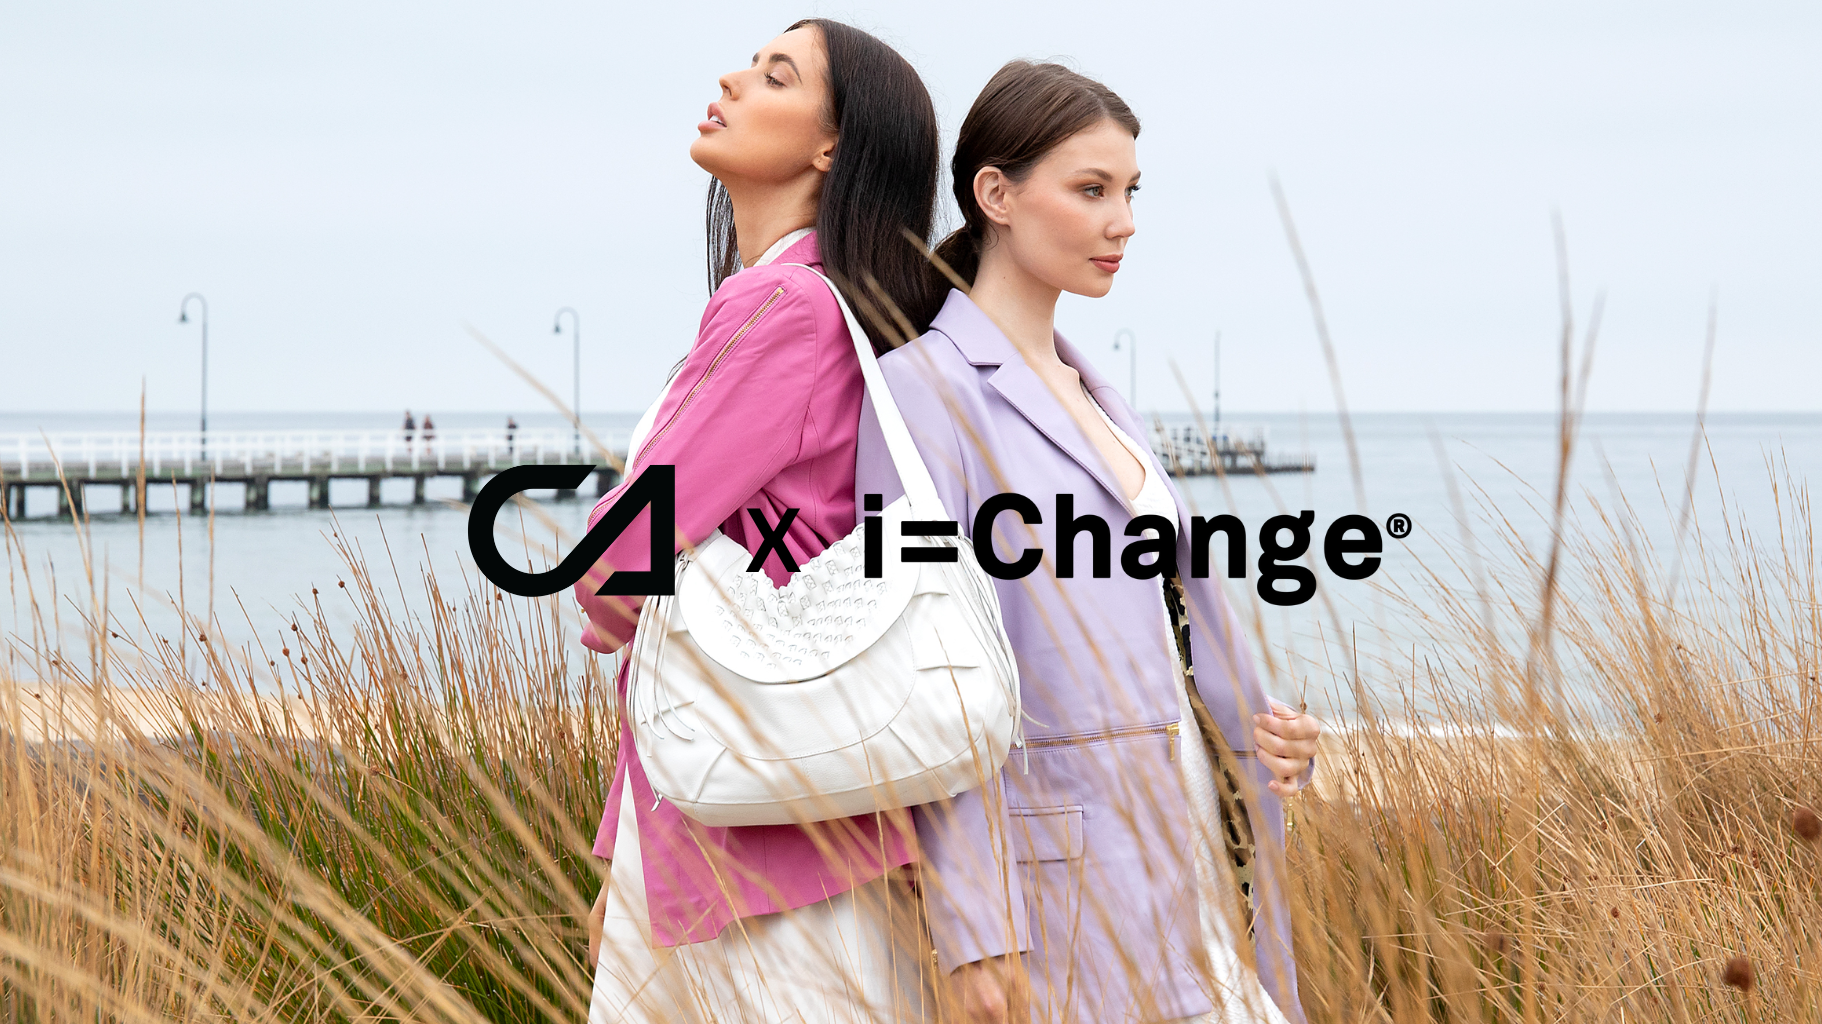 Cadelle Partnerships: Making a difference with i=Change